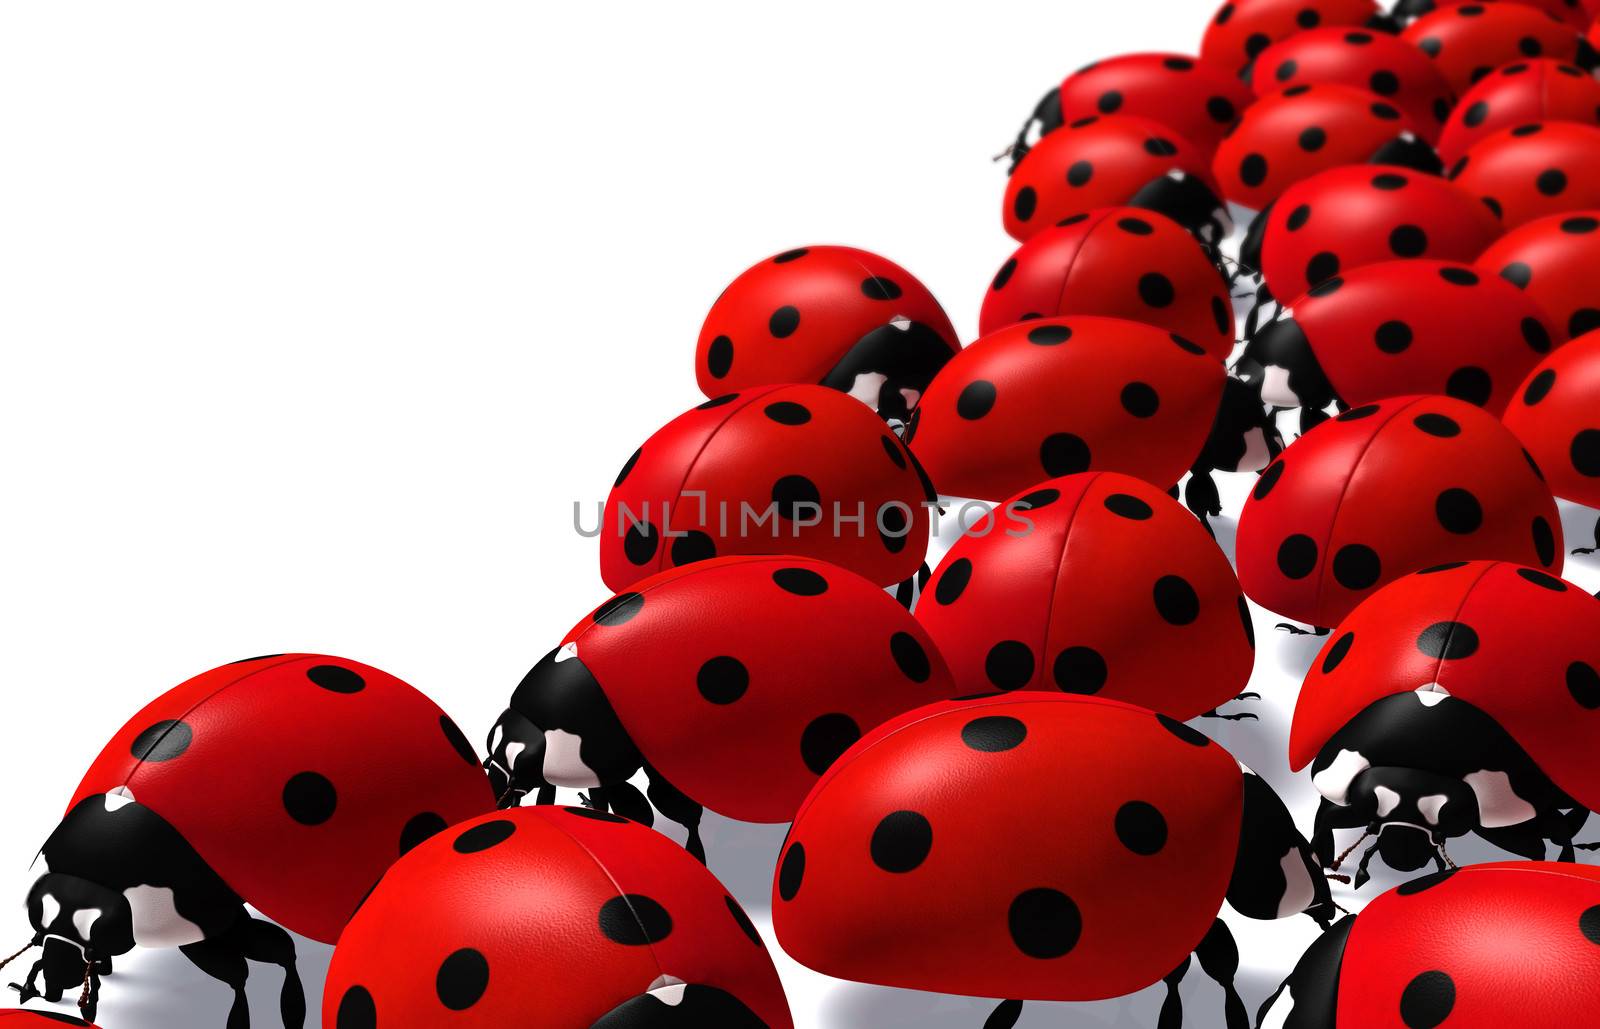 Group of ladybugs by TaiChesco